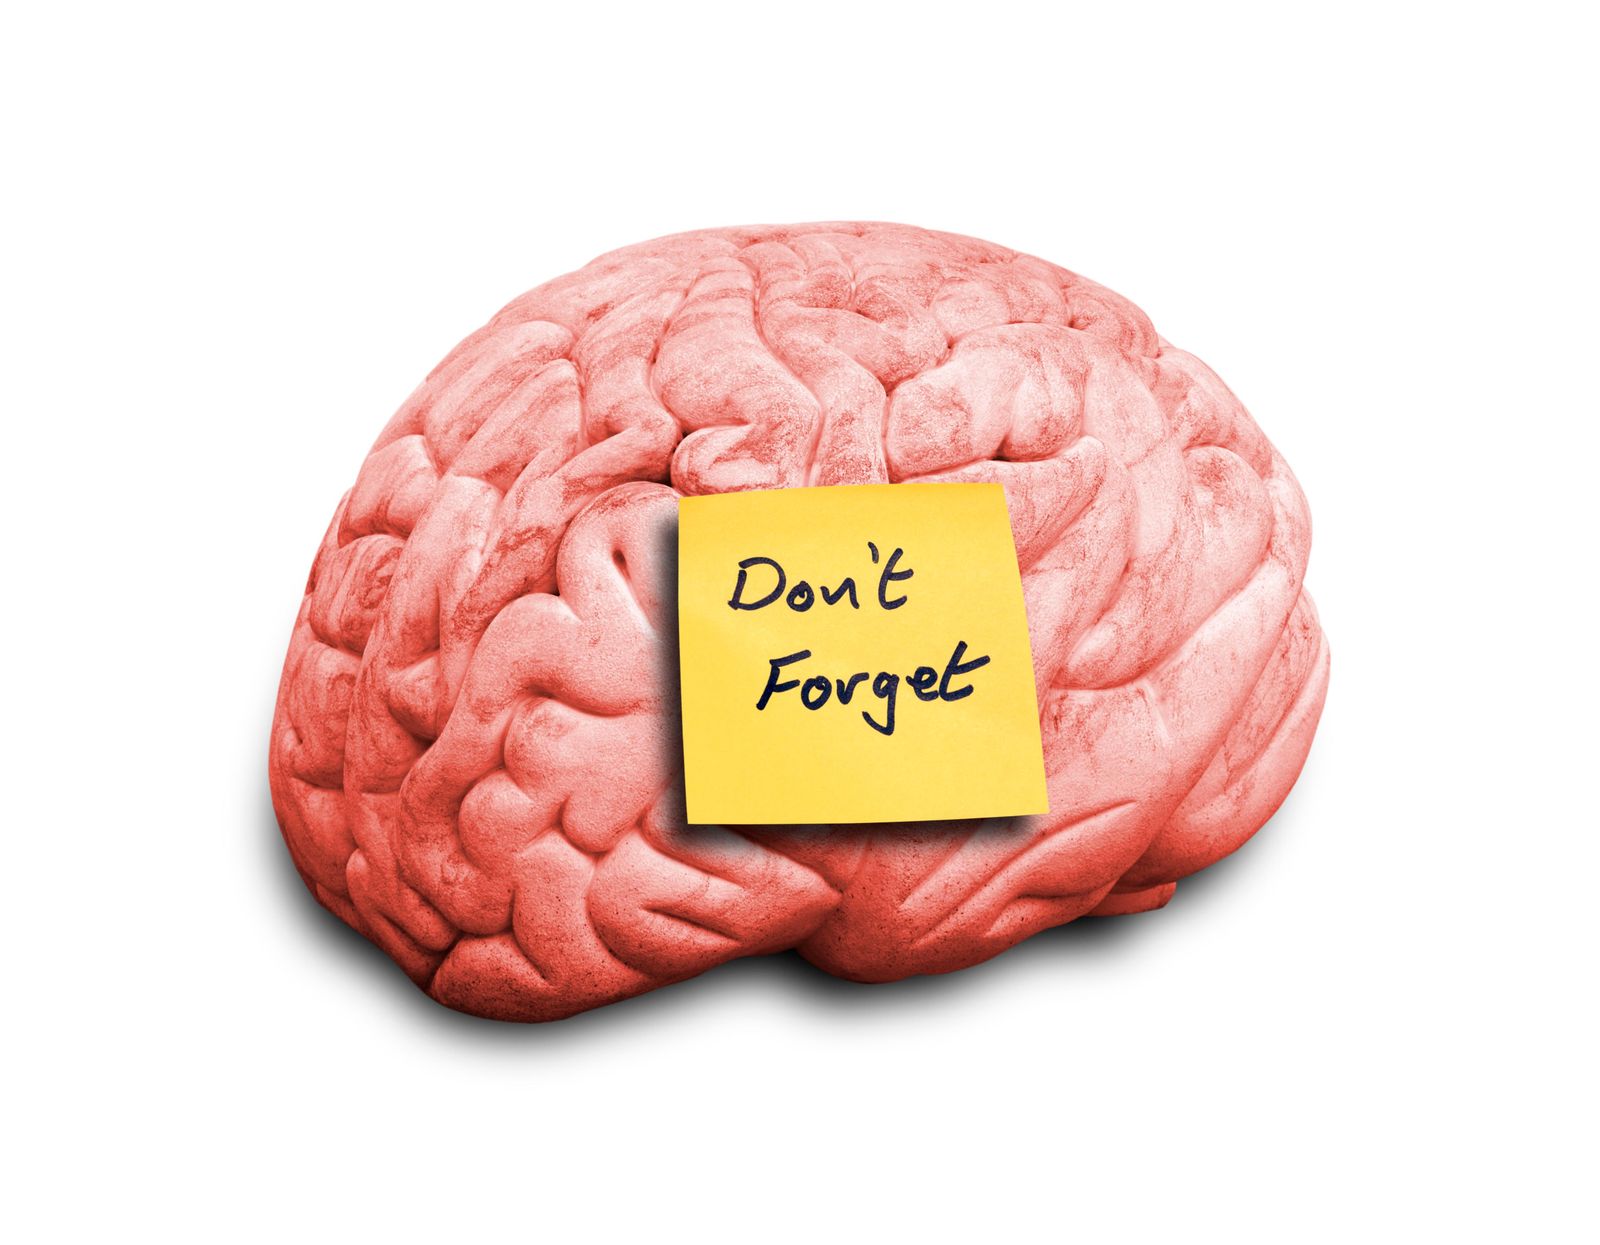 Мозг биология огэ. Digital Brain. Dementia and Sticky Notes. Sticky Notes for Dementia.